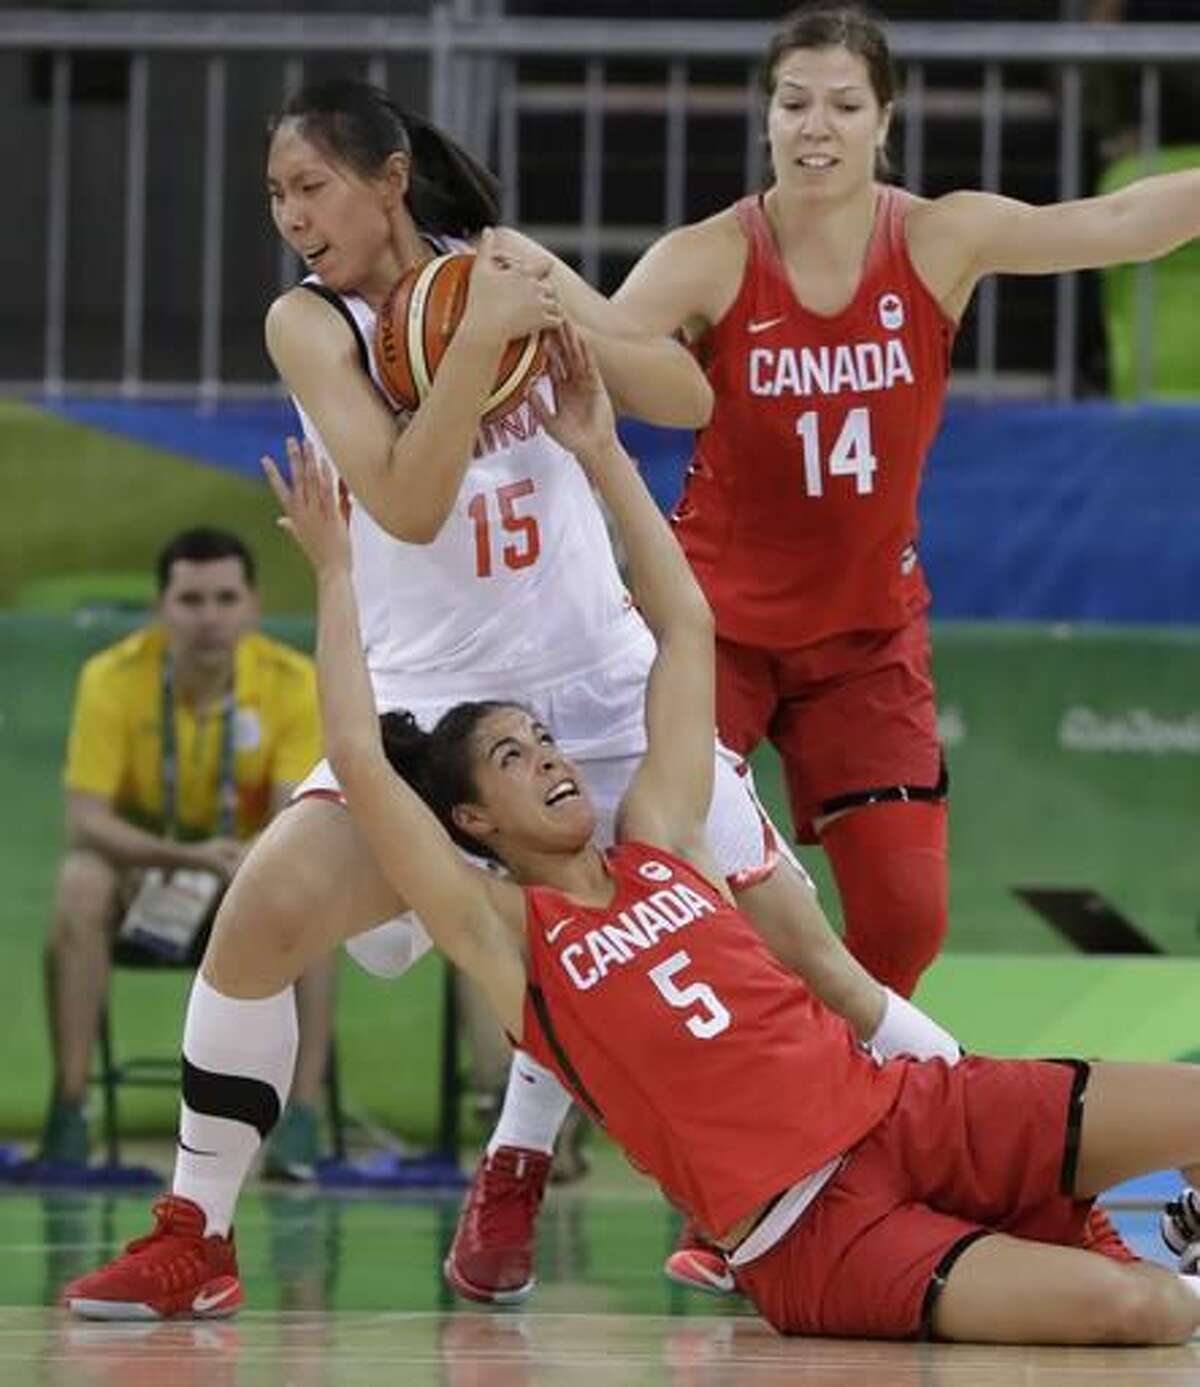 Canada guard Kia Nurse (5) reaches on China center Nan Chen for the ball during the first half of a women's basketball game at the Youth Center at the 2016 Summer Olympics in Rio de Janeiro, Brazil, Saturday, Aug. 6, 2016. (AP Photo/Carlos Osorio)